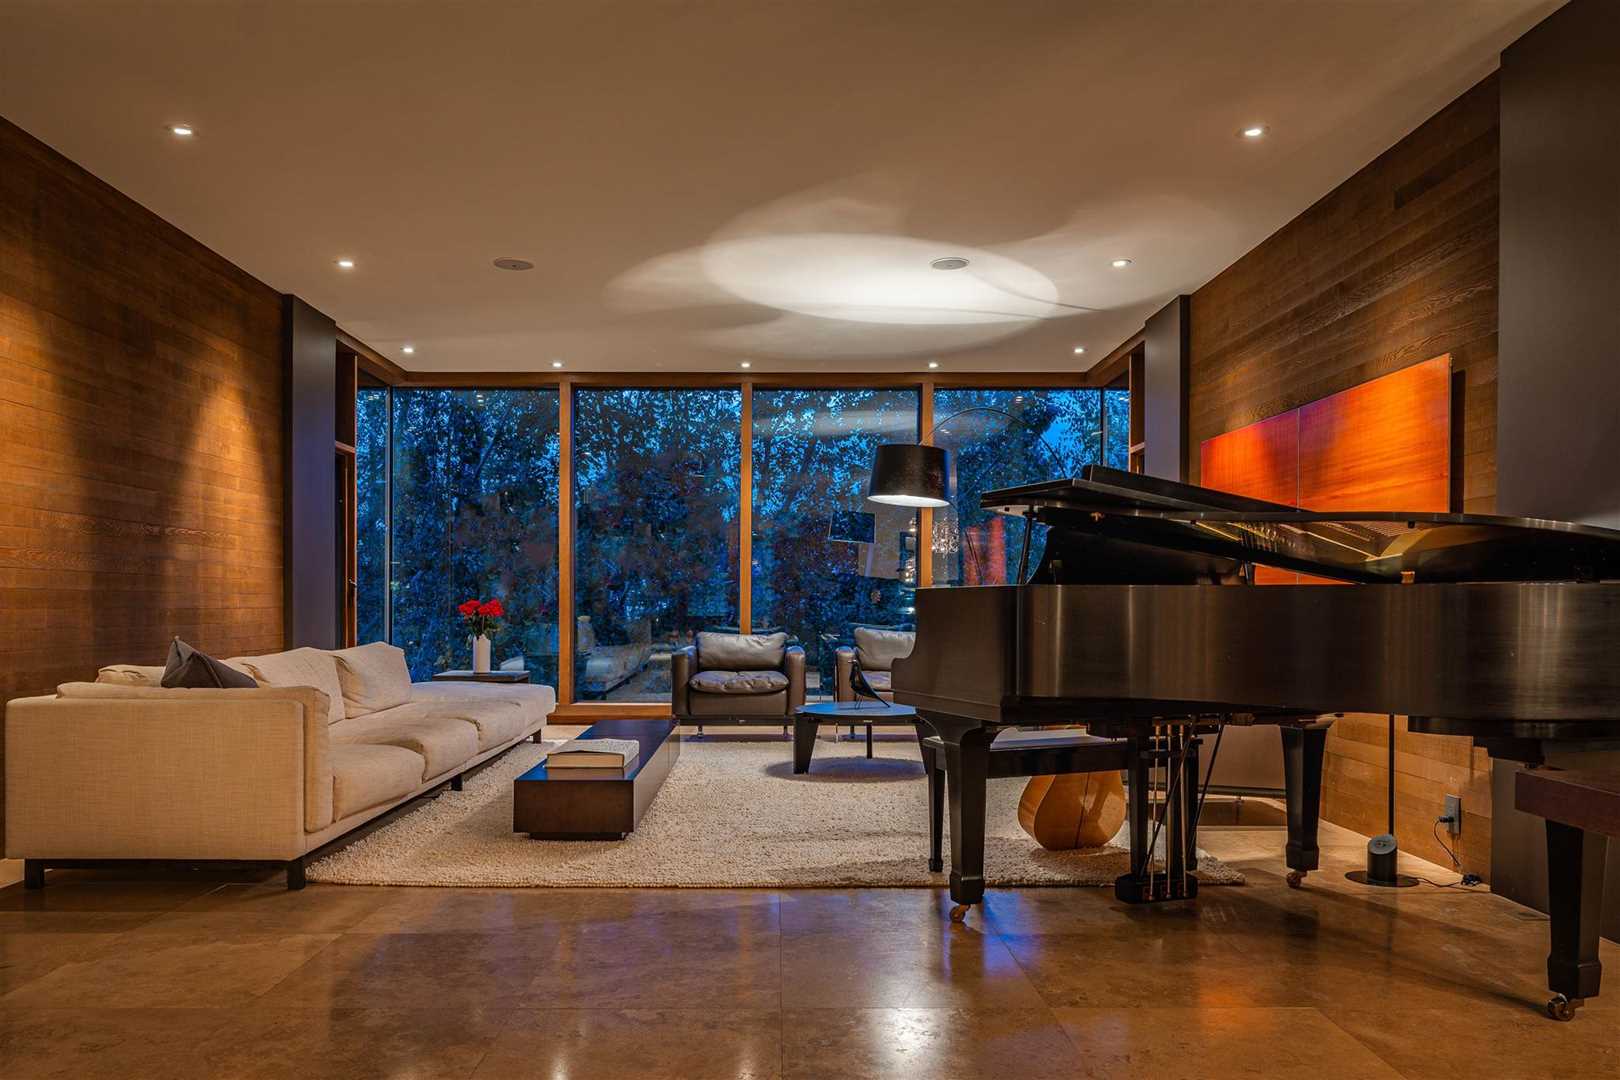 Interior living music room, brown marble floor and wood walls, white ceiling; grand piano to right with a guitar sitting on the other side; white cloth couch on left, two leather chairs centre, white shag carpet in the middle; floor-to-ceiling windows in background 